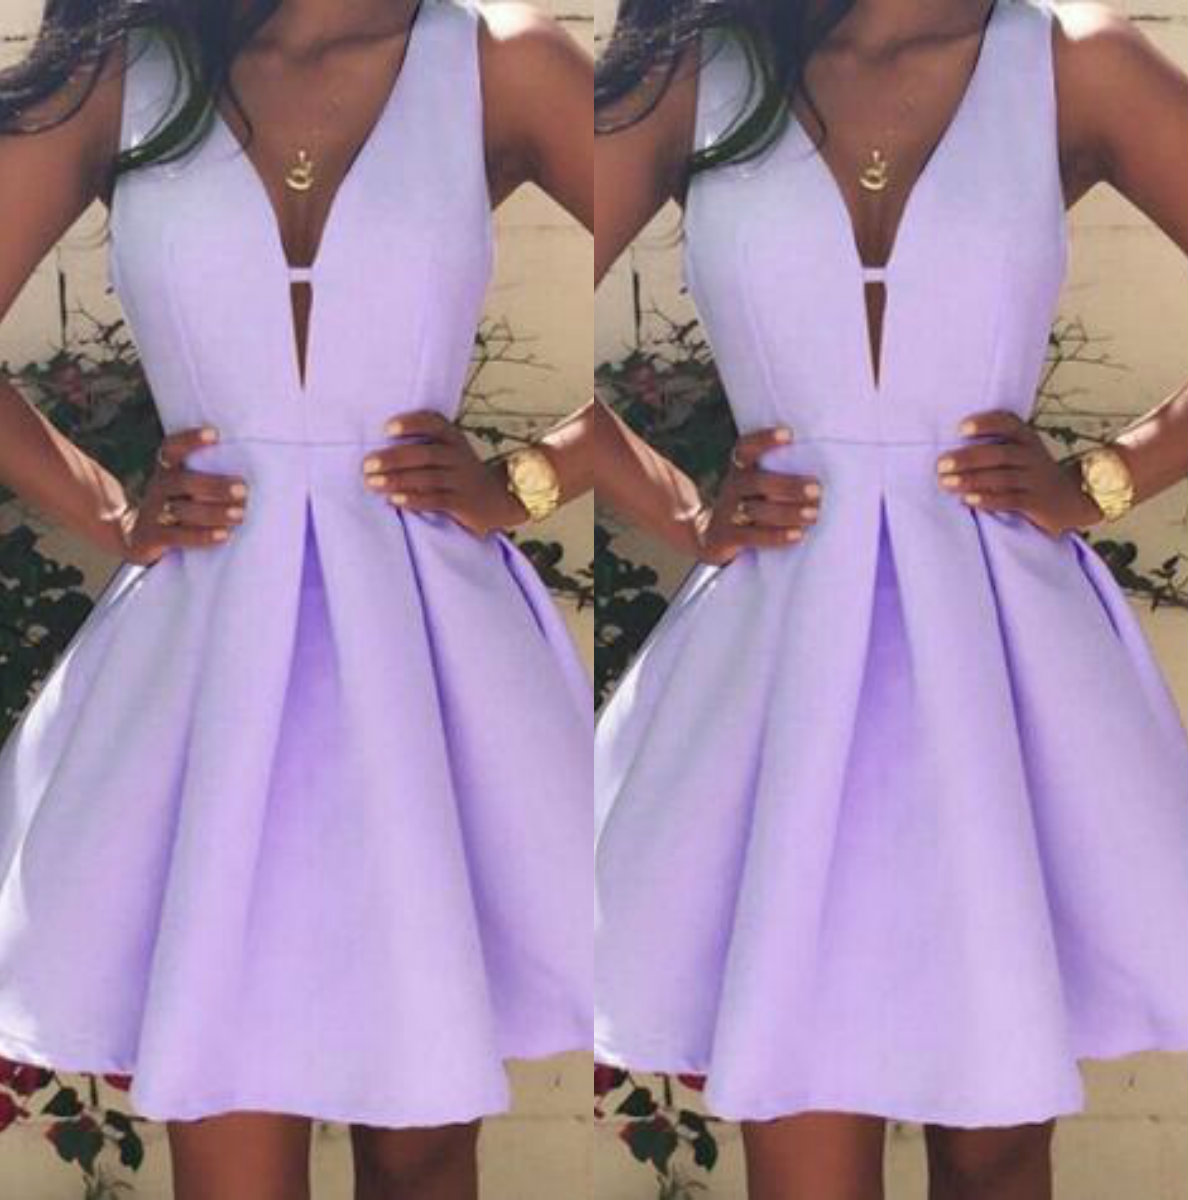 

Fashion Purple Short Prom Dresses Sexy V Neck Mini Cocktail Dress Saudi Arabic A Line Pageant Homecoming Party Gowns, Light purple